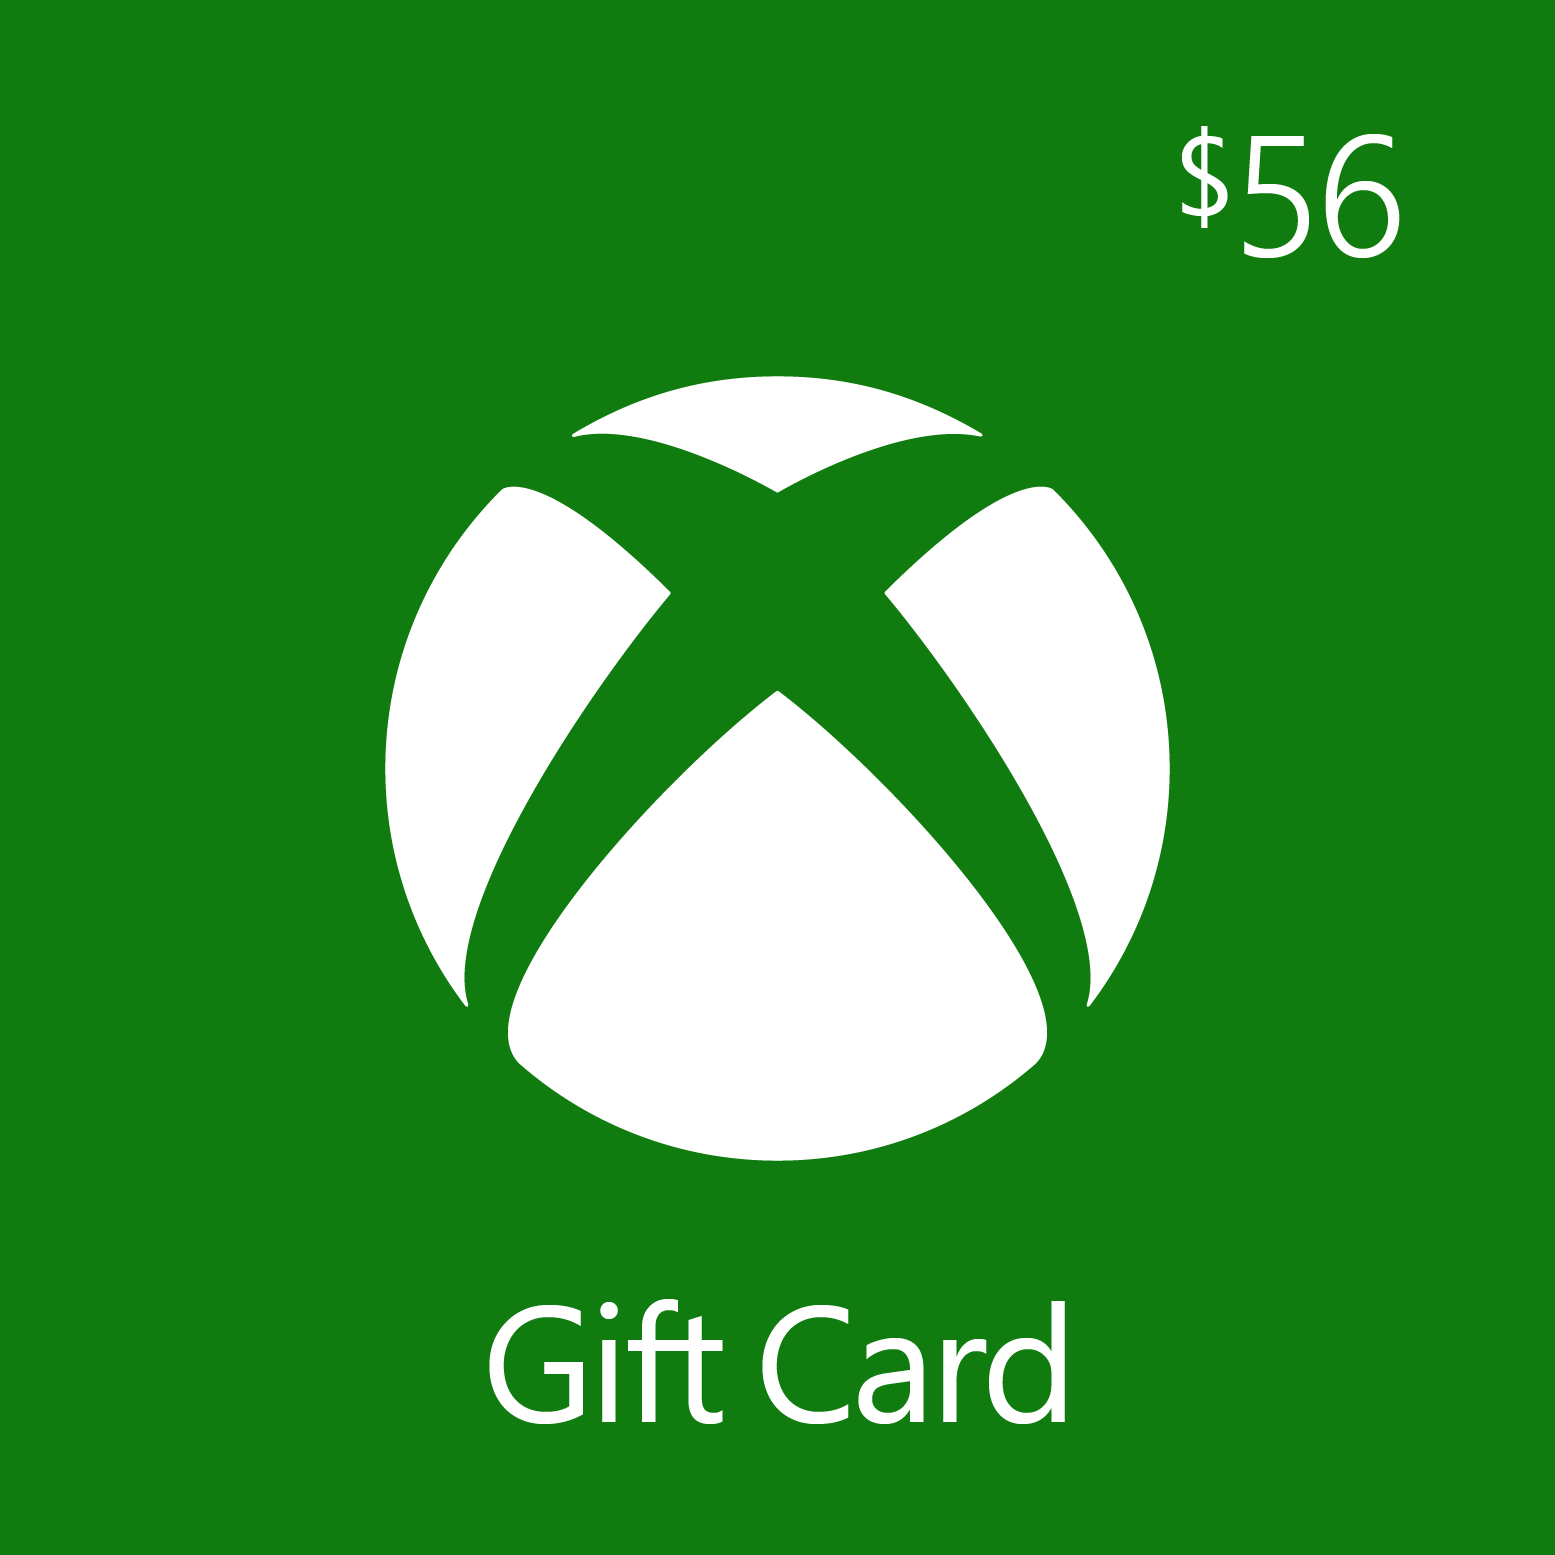 xbox game pass gift card code